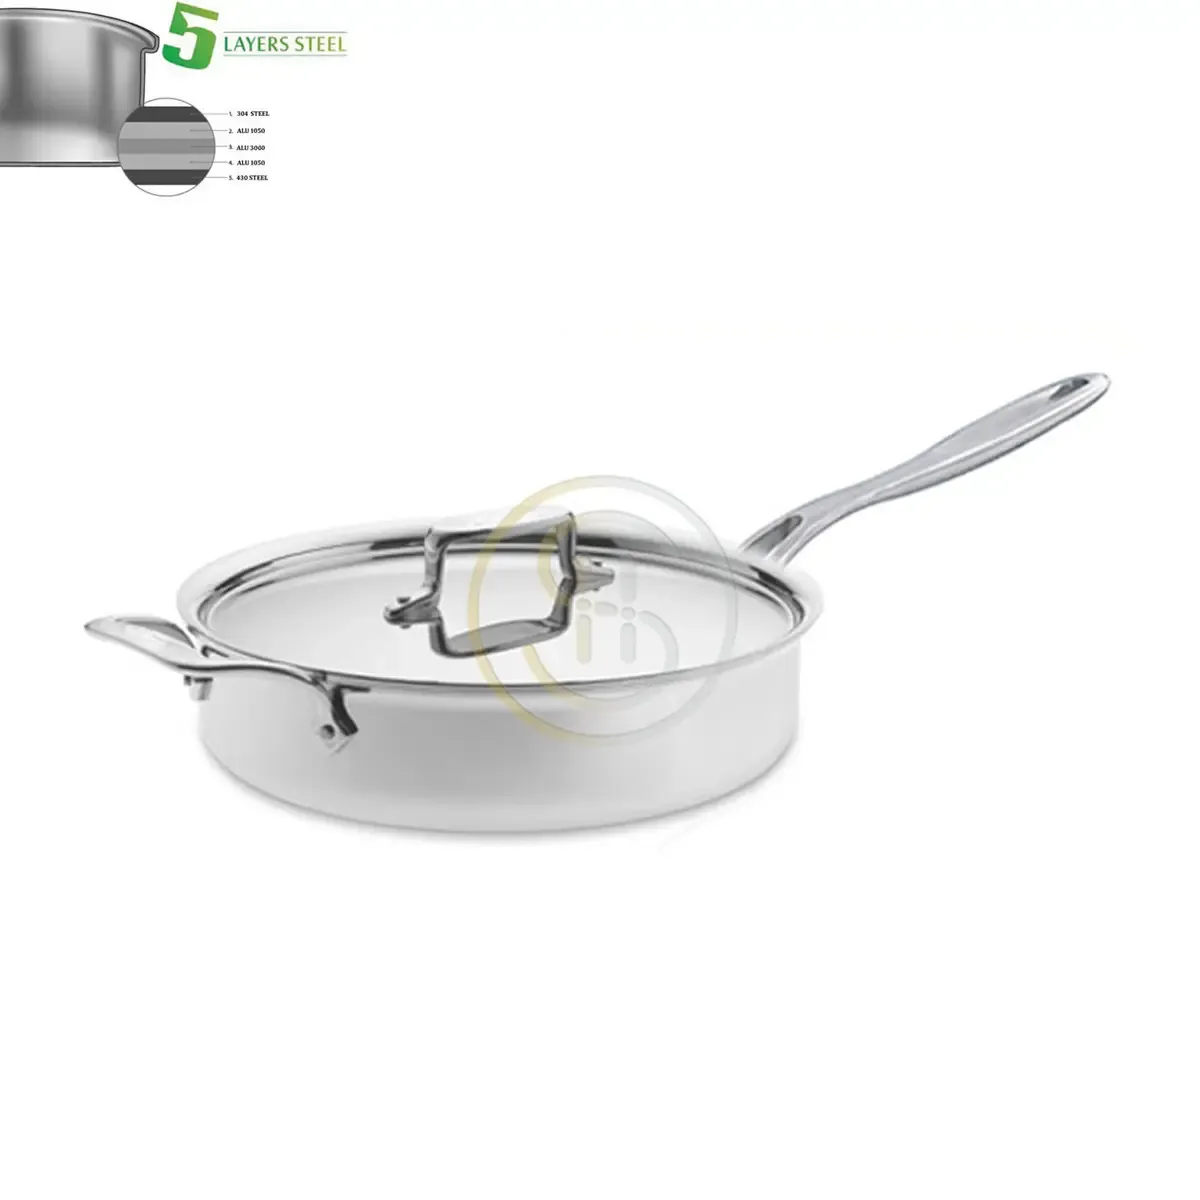 5Ply All Clad Steel Body Induction Cookware set